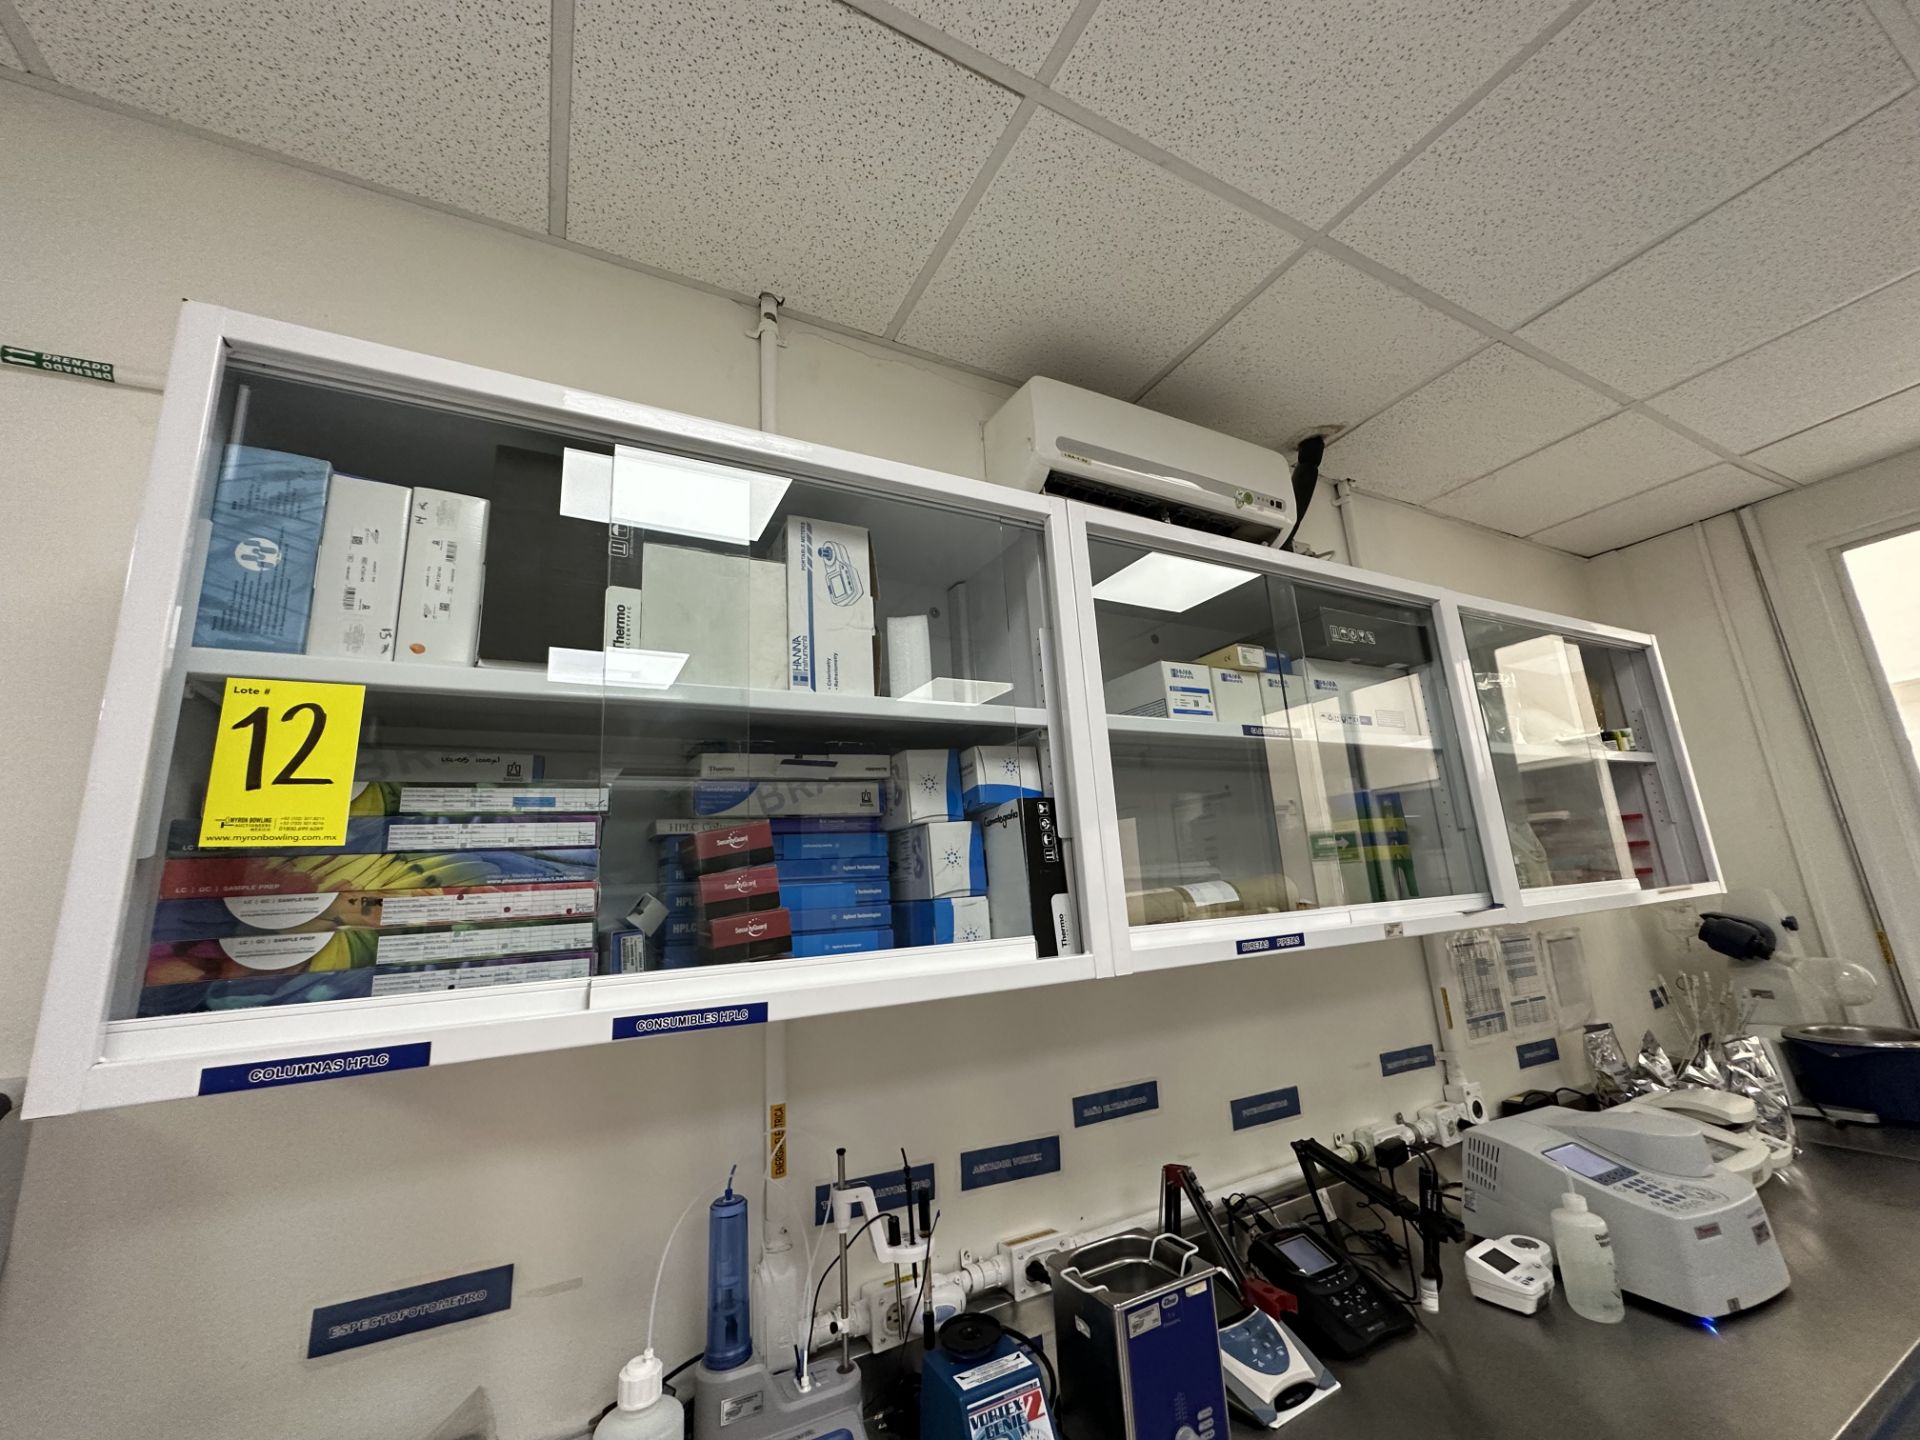 1 laboratory corner cabinet with stainless steel cover measures approximately 3.87 x 2.65 x 0.90 m; - Image 10 of 12